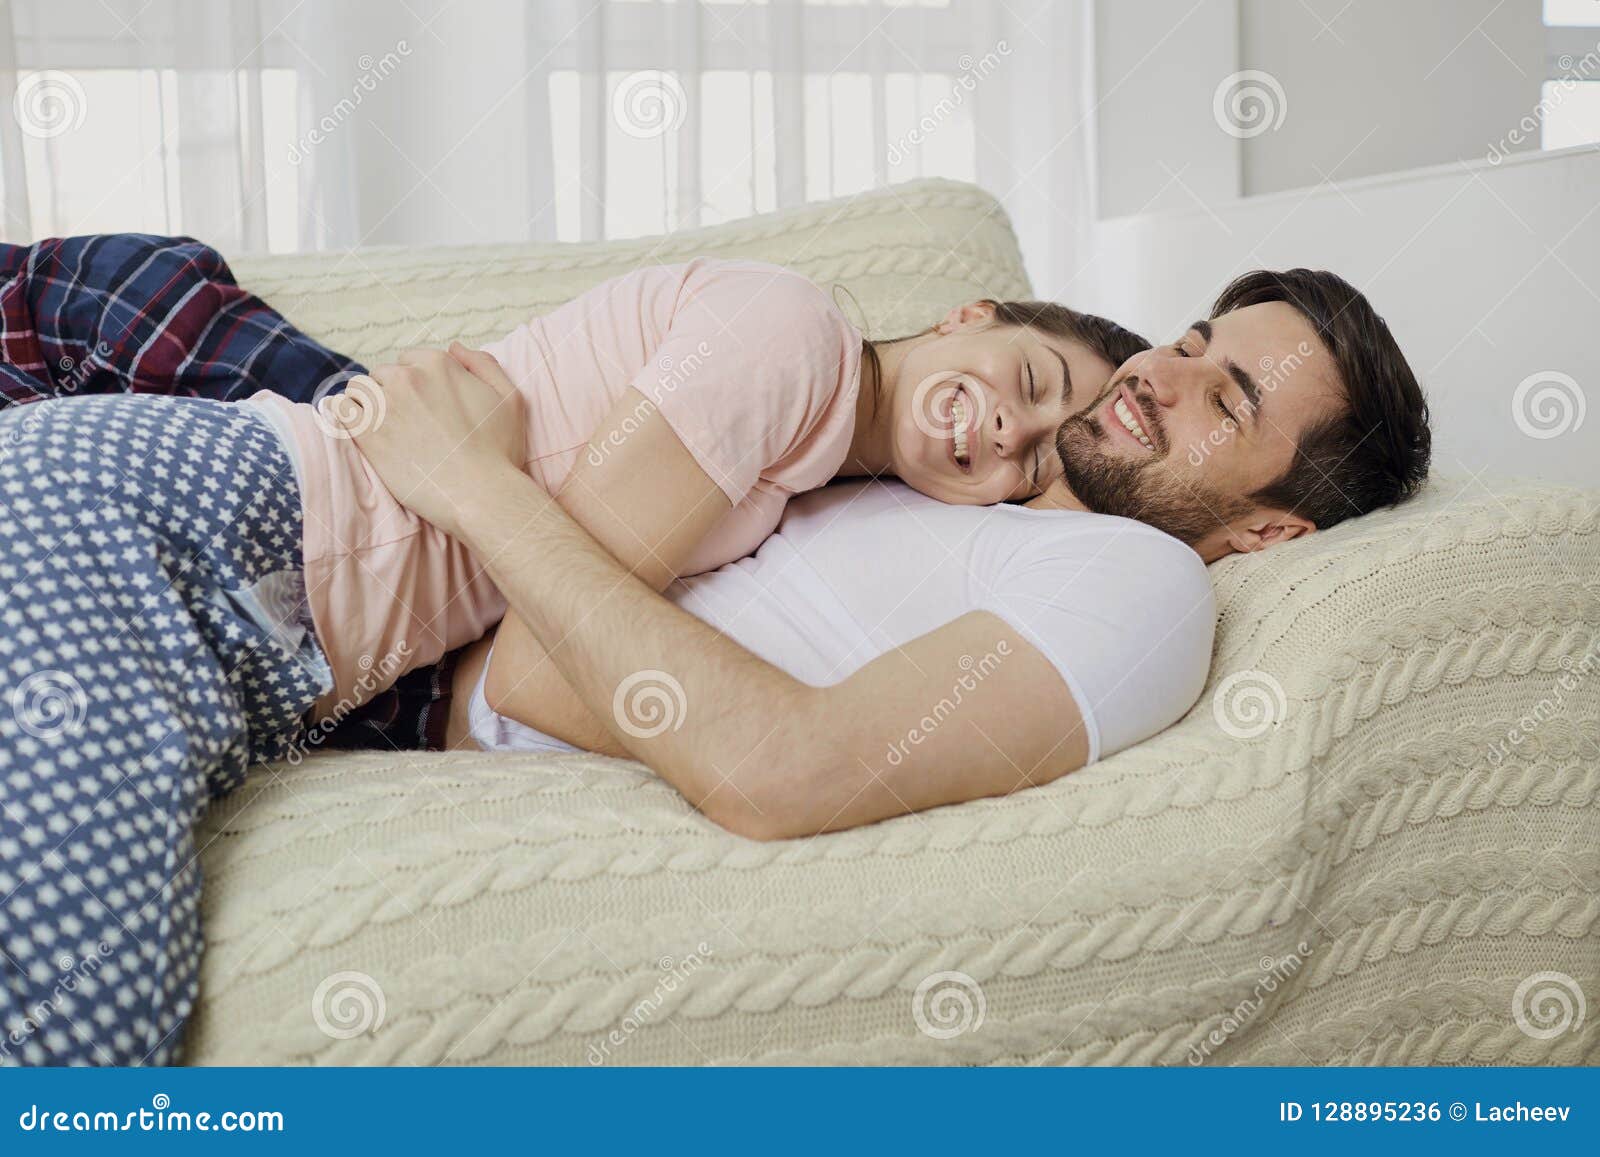 A Loving Couple Hugs Lying on the Bed in the Room. Stock Photo ...